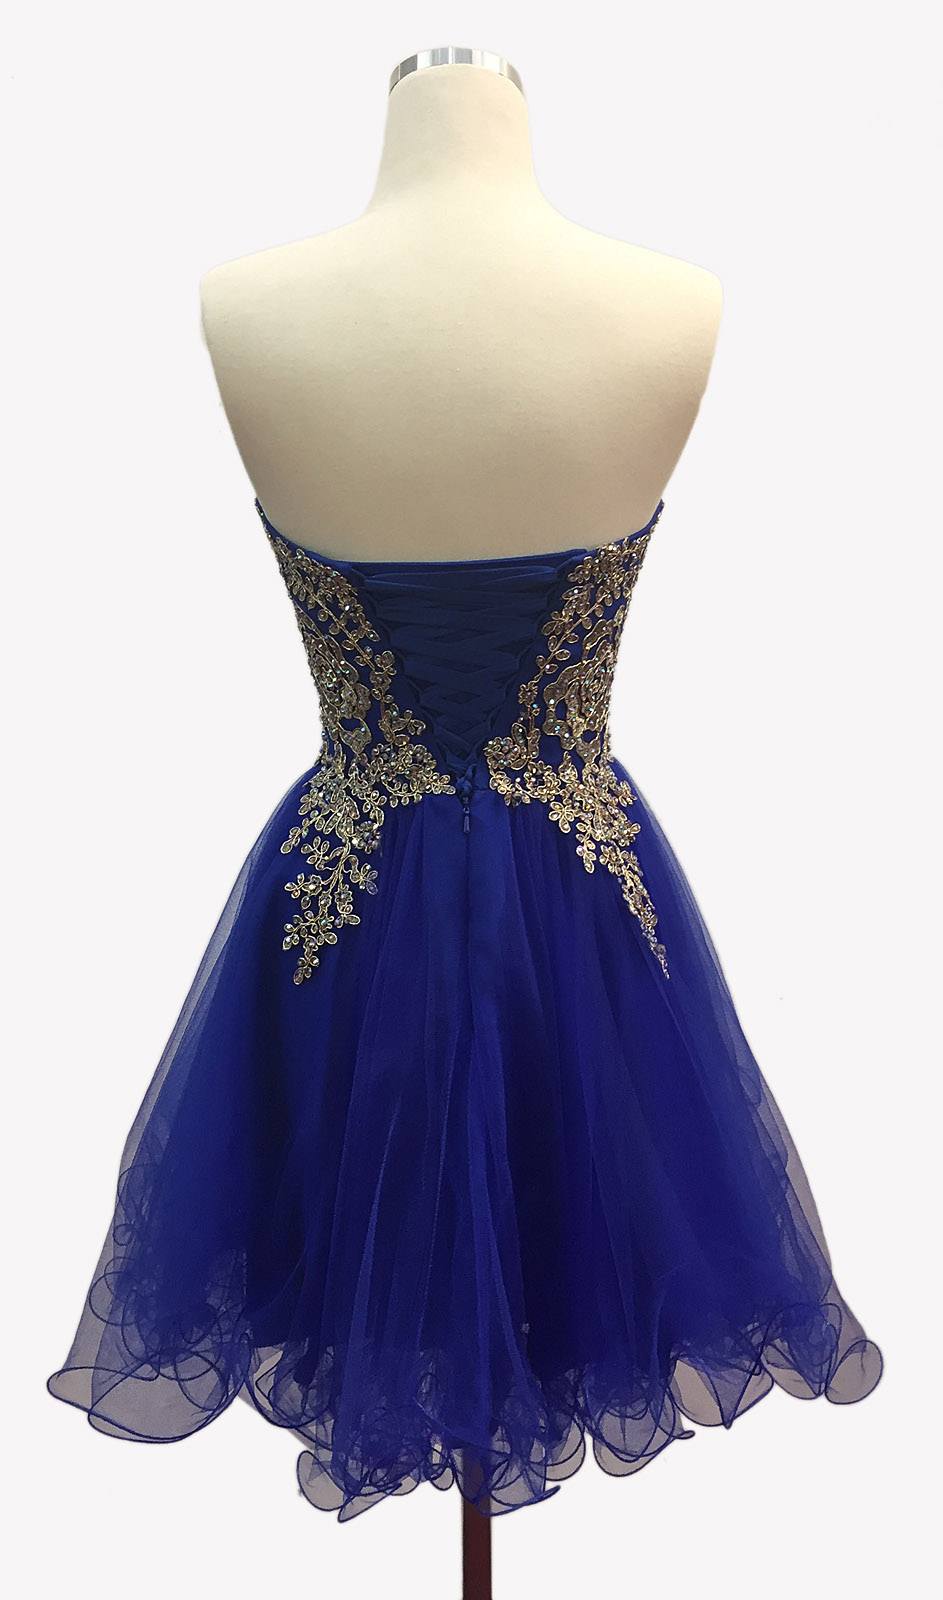 Aspeed USA S1891 Royal Blue Strapless Homecoming Short Dress Embroidered 